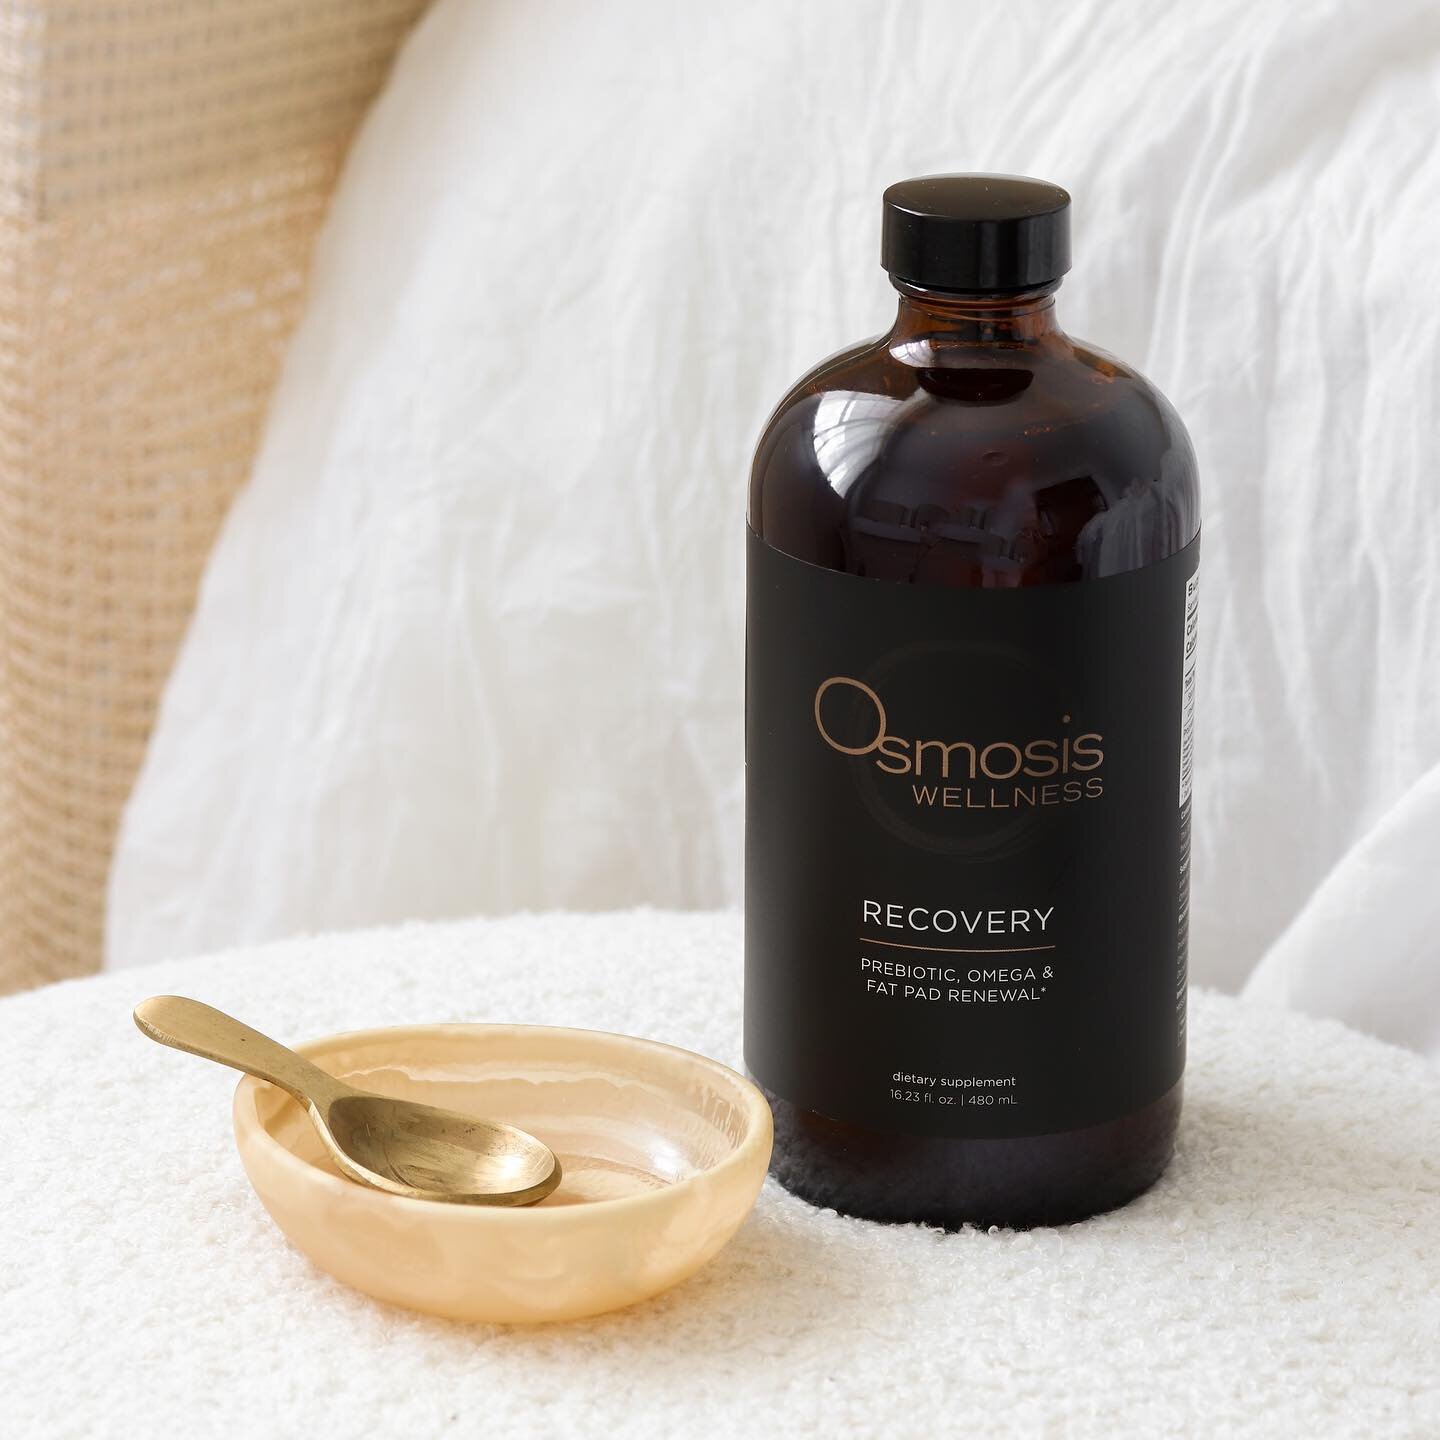 Osmosis Recovery can replace much of the facial volume loss that occurs with aging. By restoring critical nutrients to reactivate fat cells Recovery alleviates the need for volume fillers while creating a much more natural, youthful appearance. 

Rec